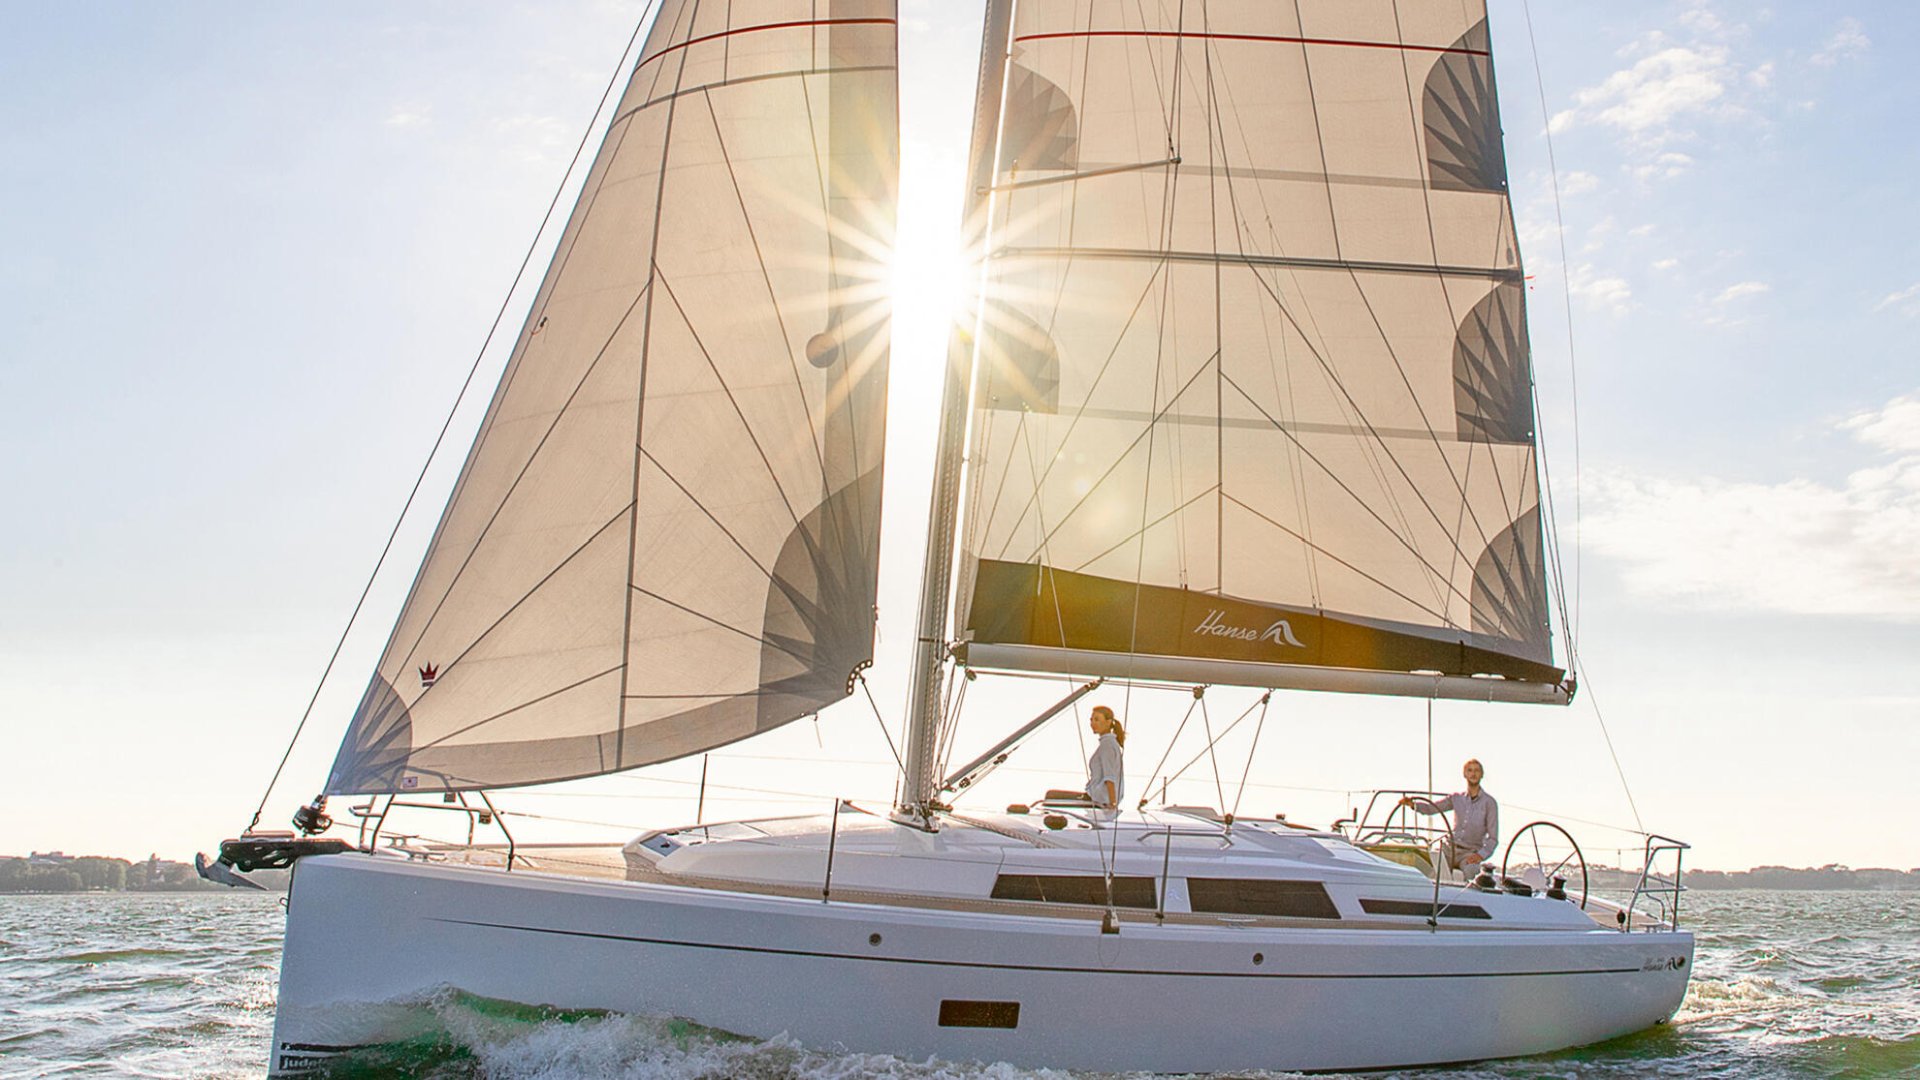 360 VR Virtual Tours of the Hanse 348